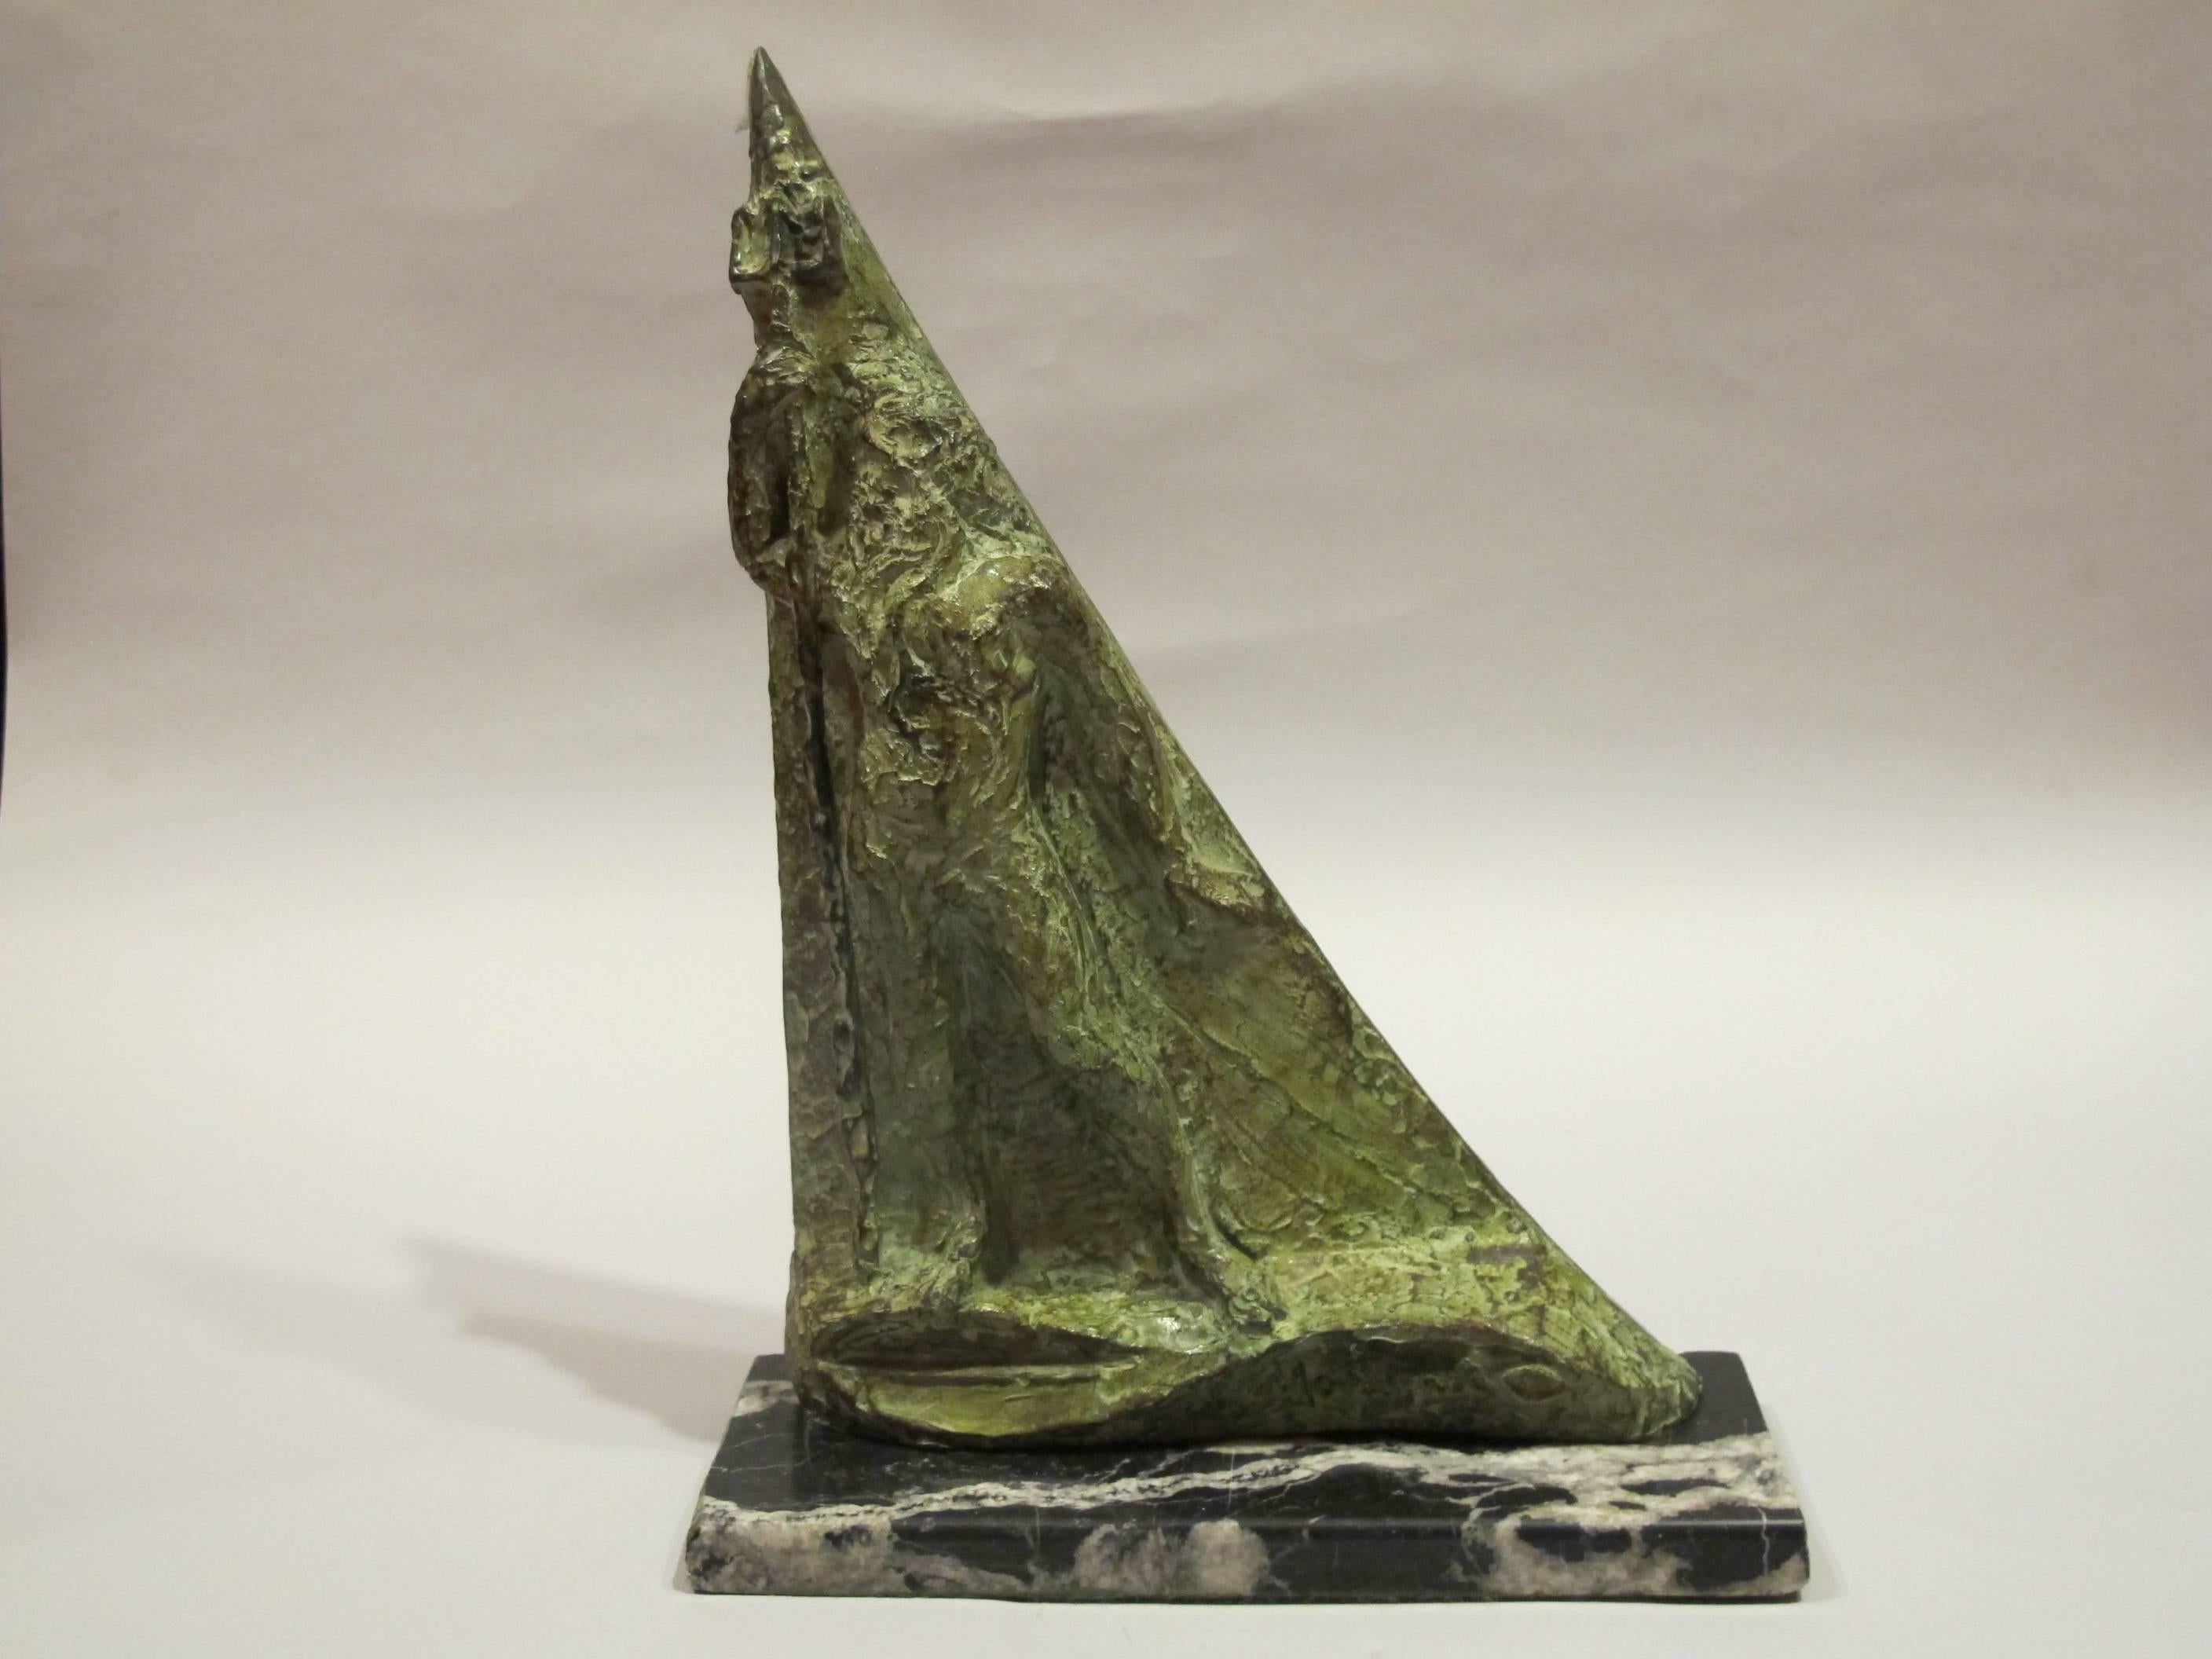 Bronze with green patination
Signed lower right with foundry mark “A. Valsuani”

Moirignot sculptures Exhibiton André Pacitti gallery, Paris, 1968
Moirignot, marbres originaux, pierres, bronzes, aquarellles, dessins, exposition André Pacitti